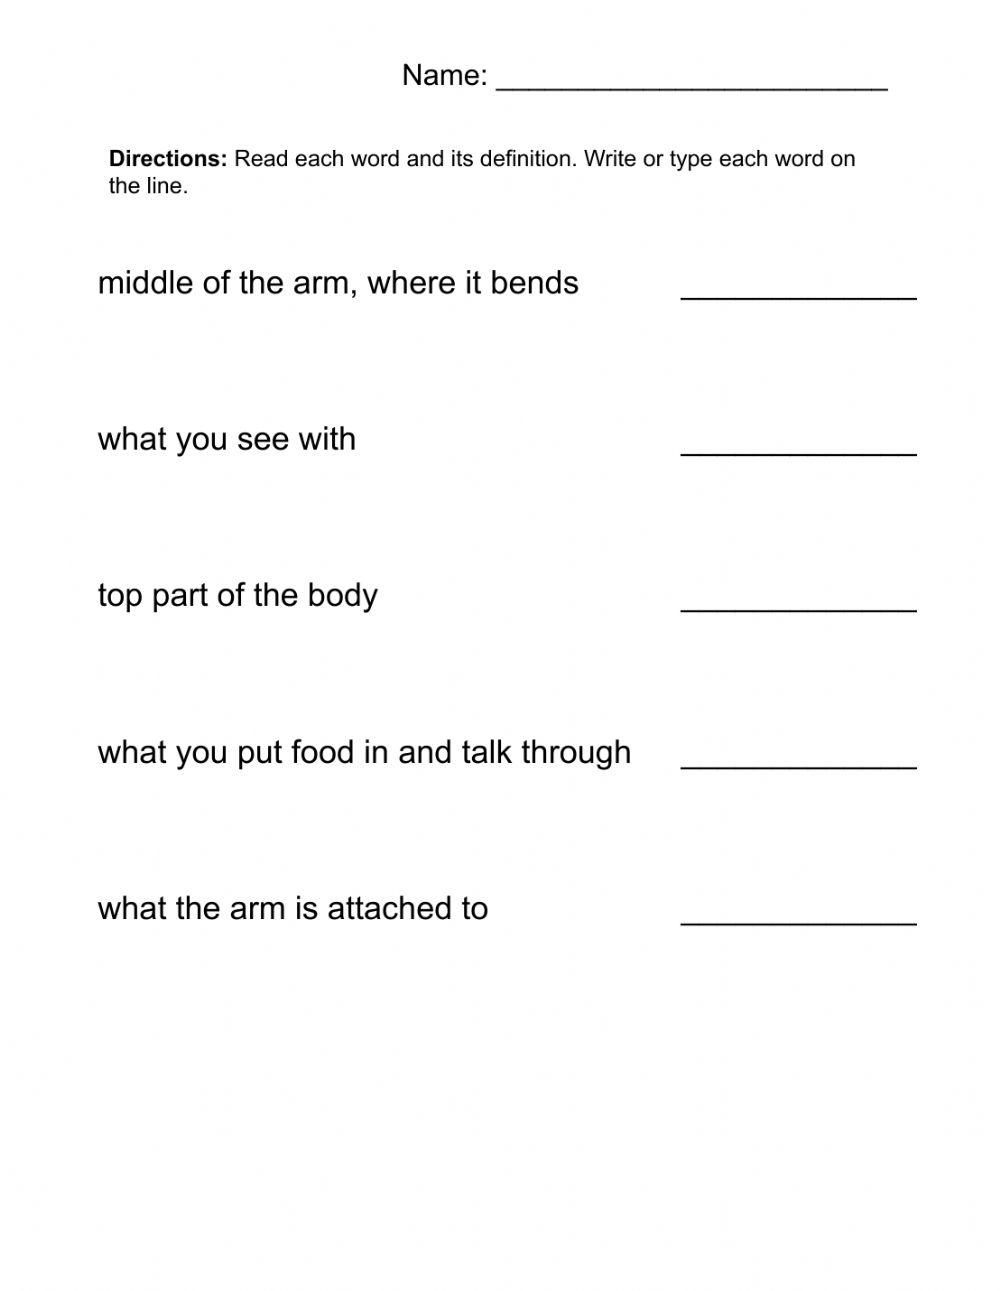 ELA Body Words 1: Write and Definition